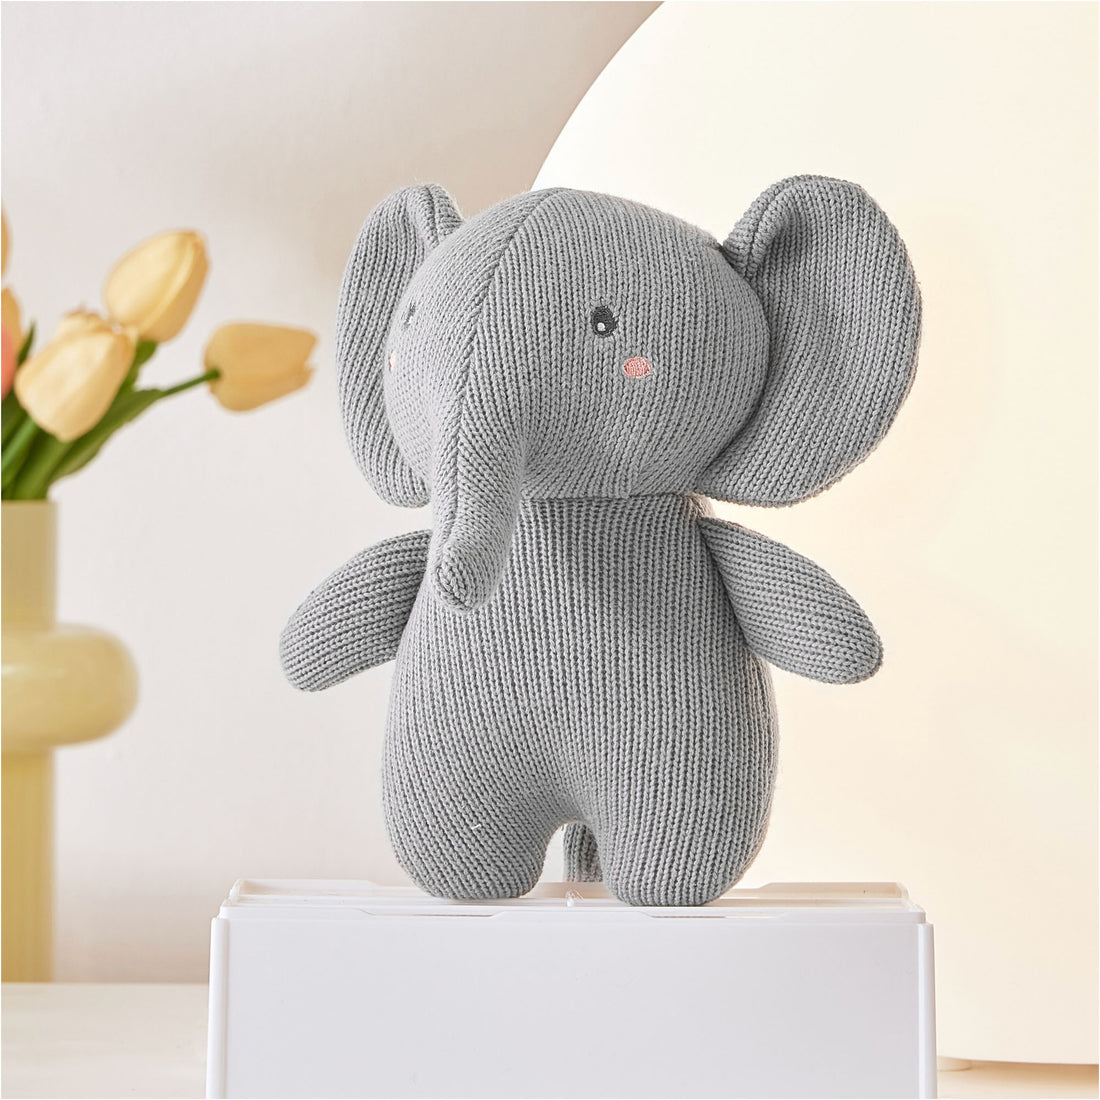 A close-up photo of a stuffed elephant sitting on a white box on a table. The elephant is gray and white with floppy ears and a red bow tie. There is a vase of pink and yellow flowers next to the elephant on the table.